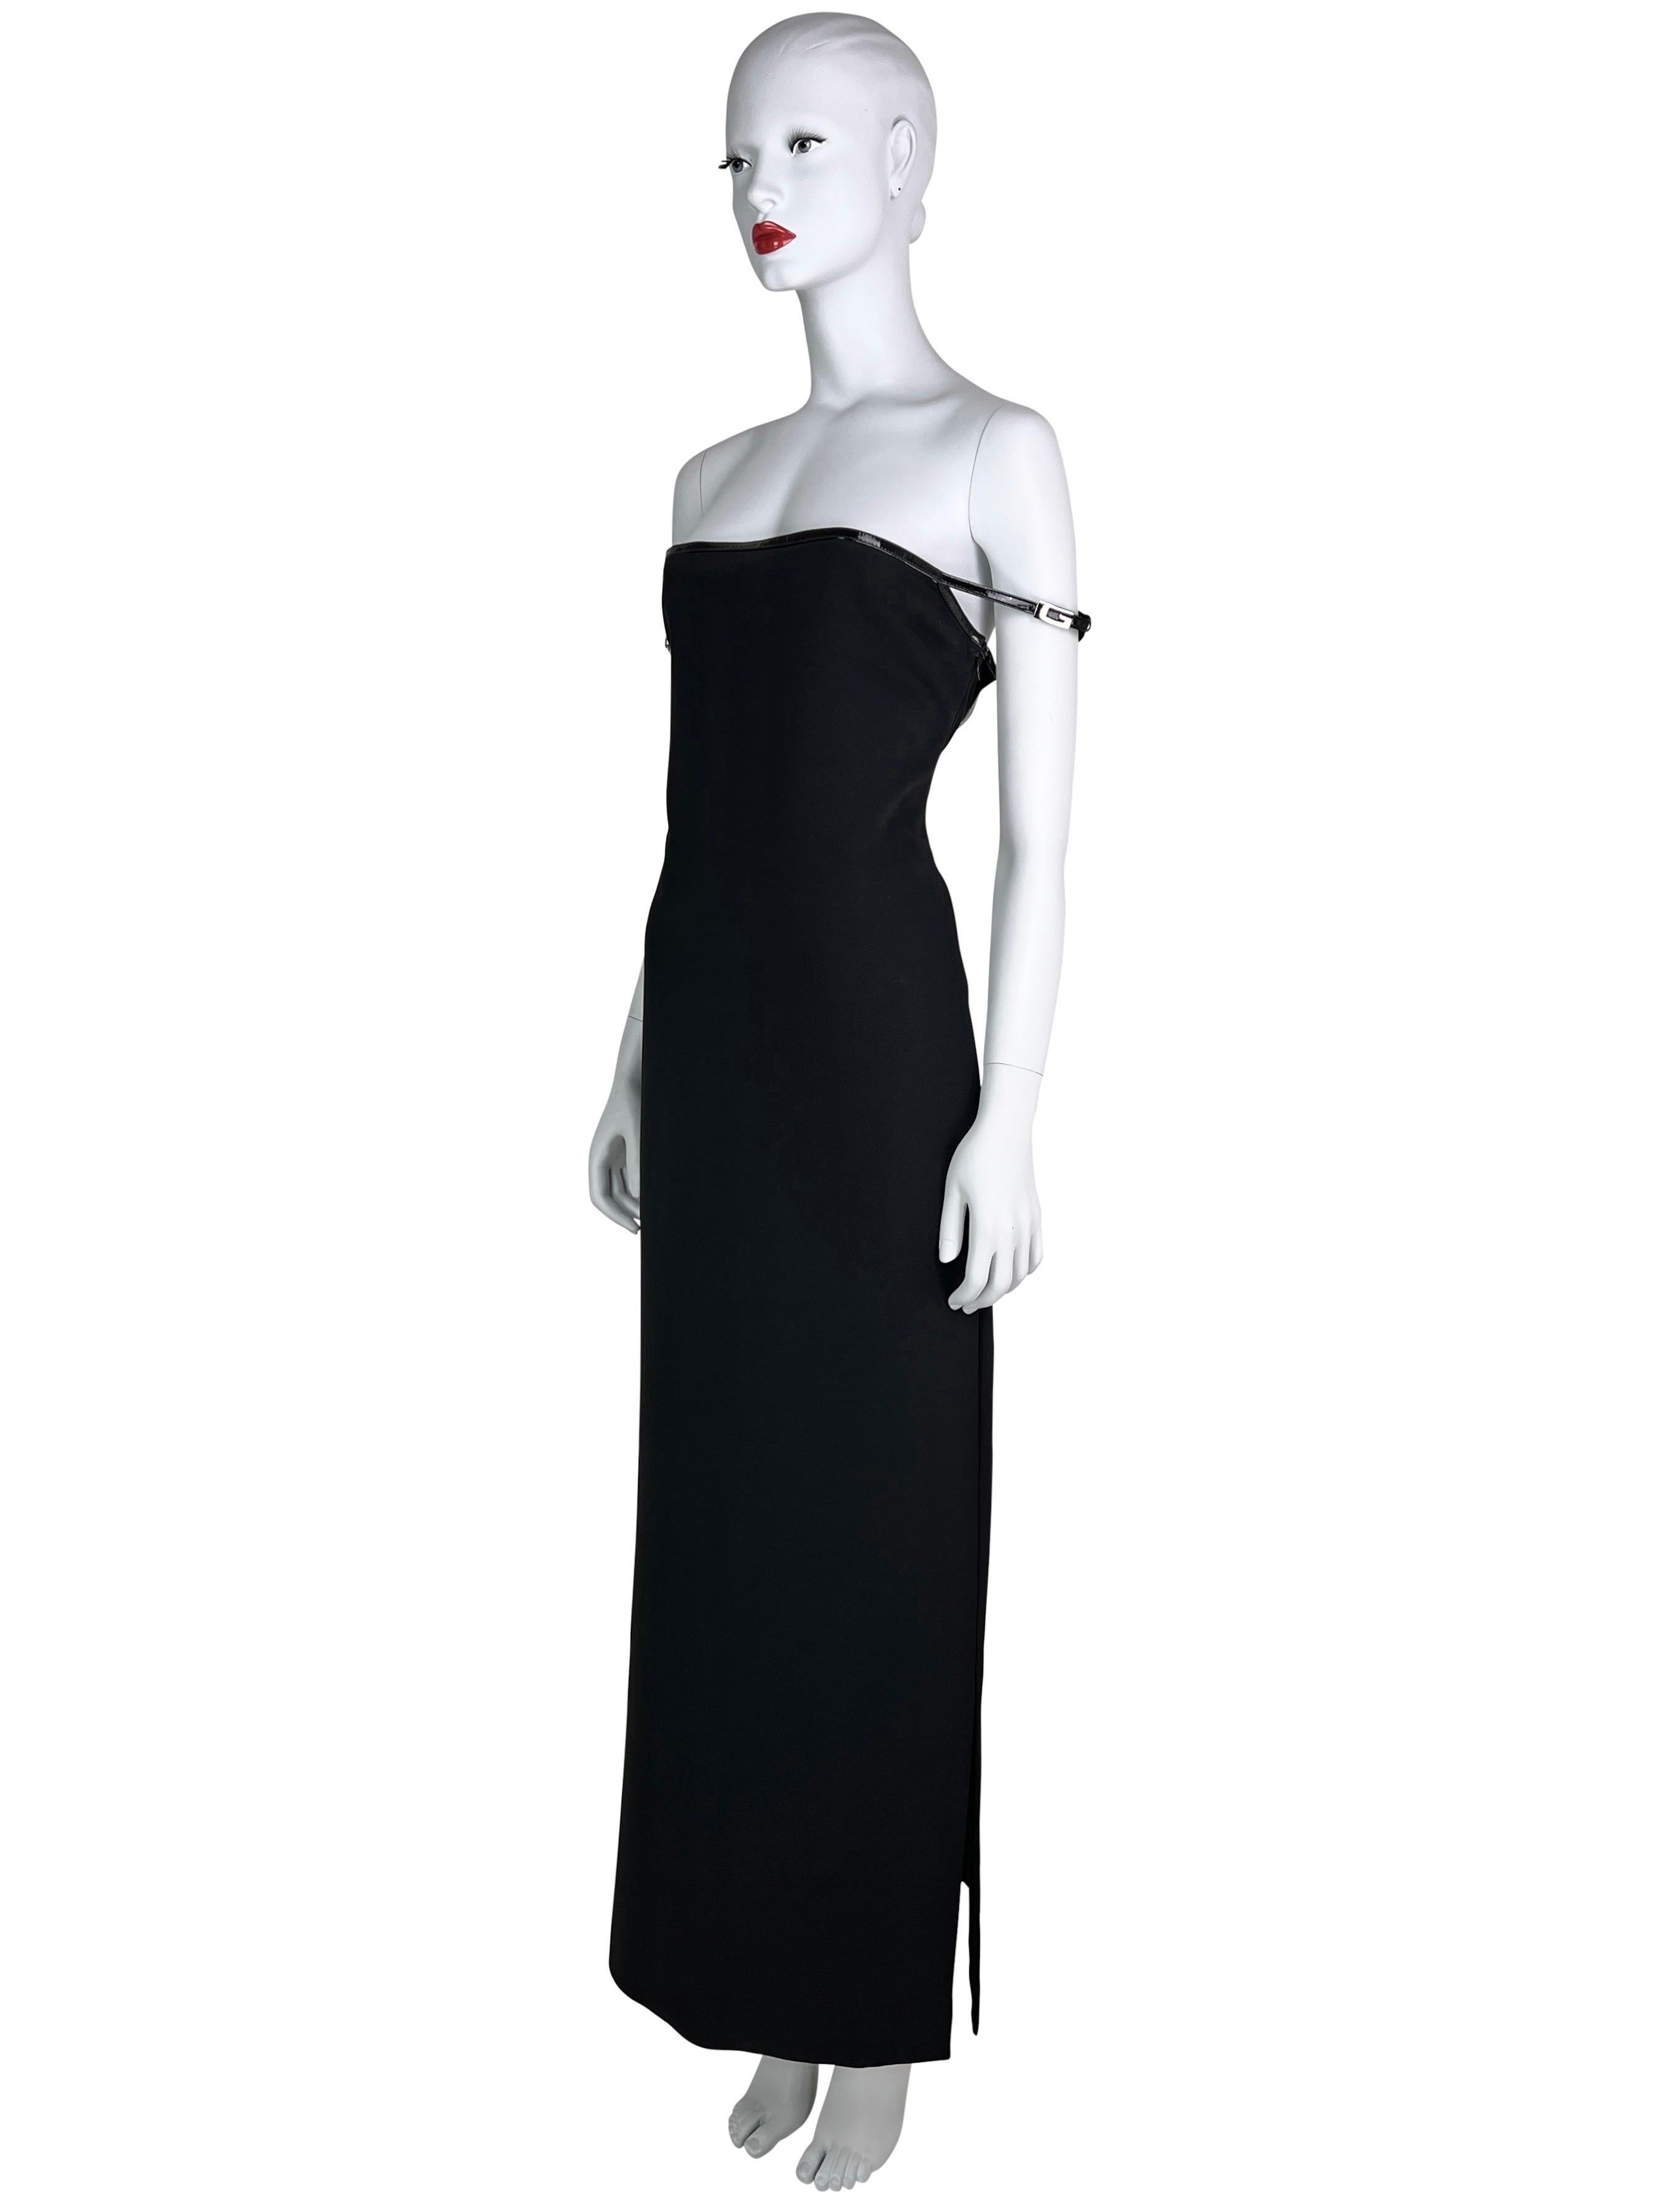 Gucci by Tom Ford Fall 1997 G-logo Strap Evening Black Dress For Sale 1